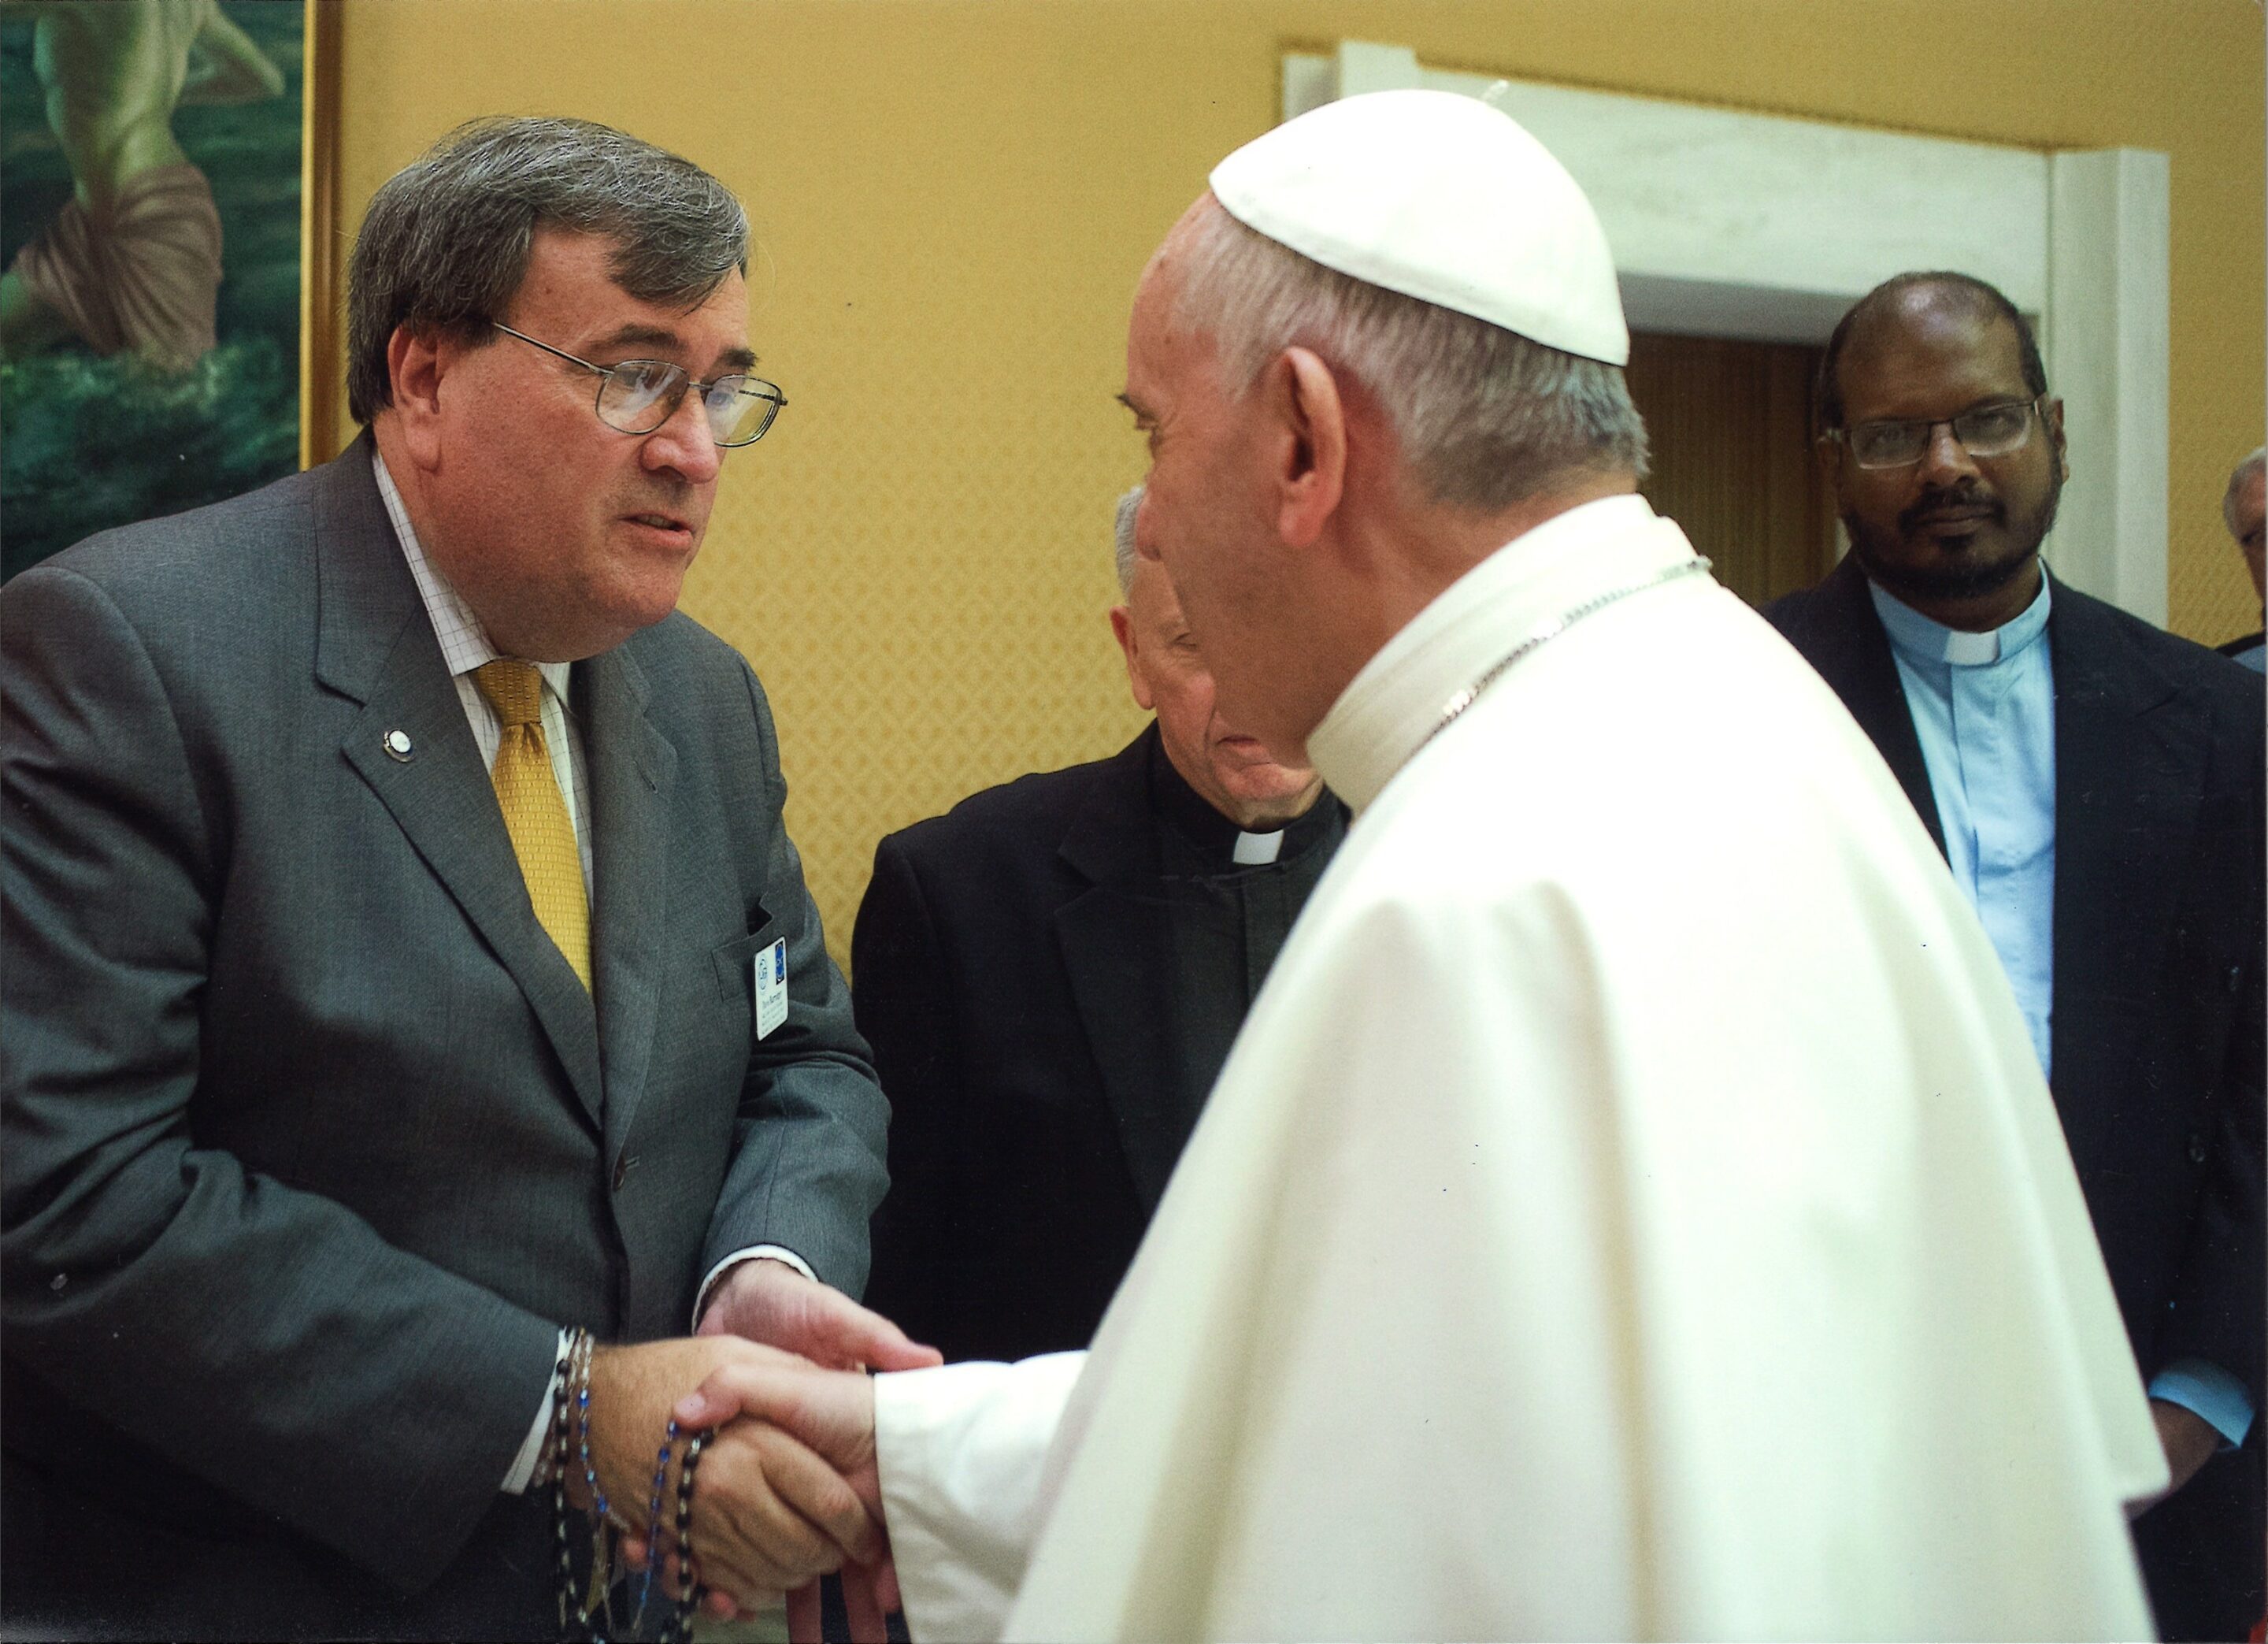 SVDP leaders speak to Pope – What would you say?